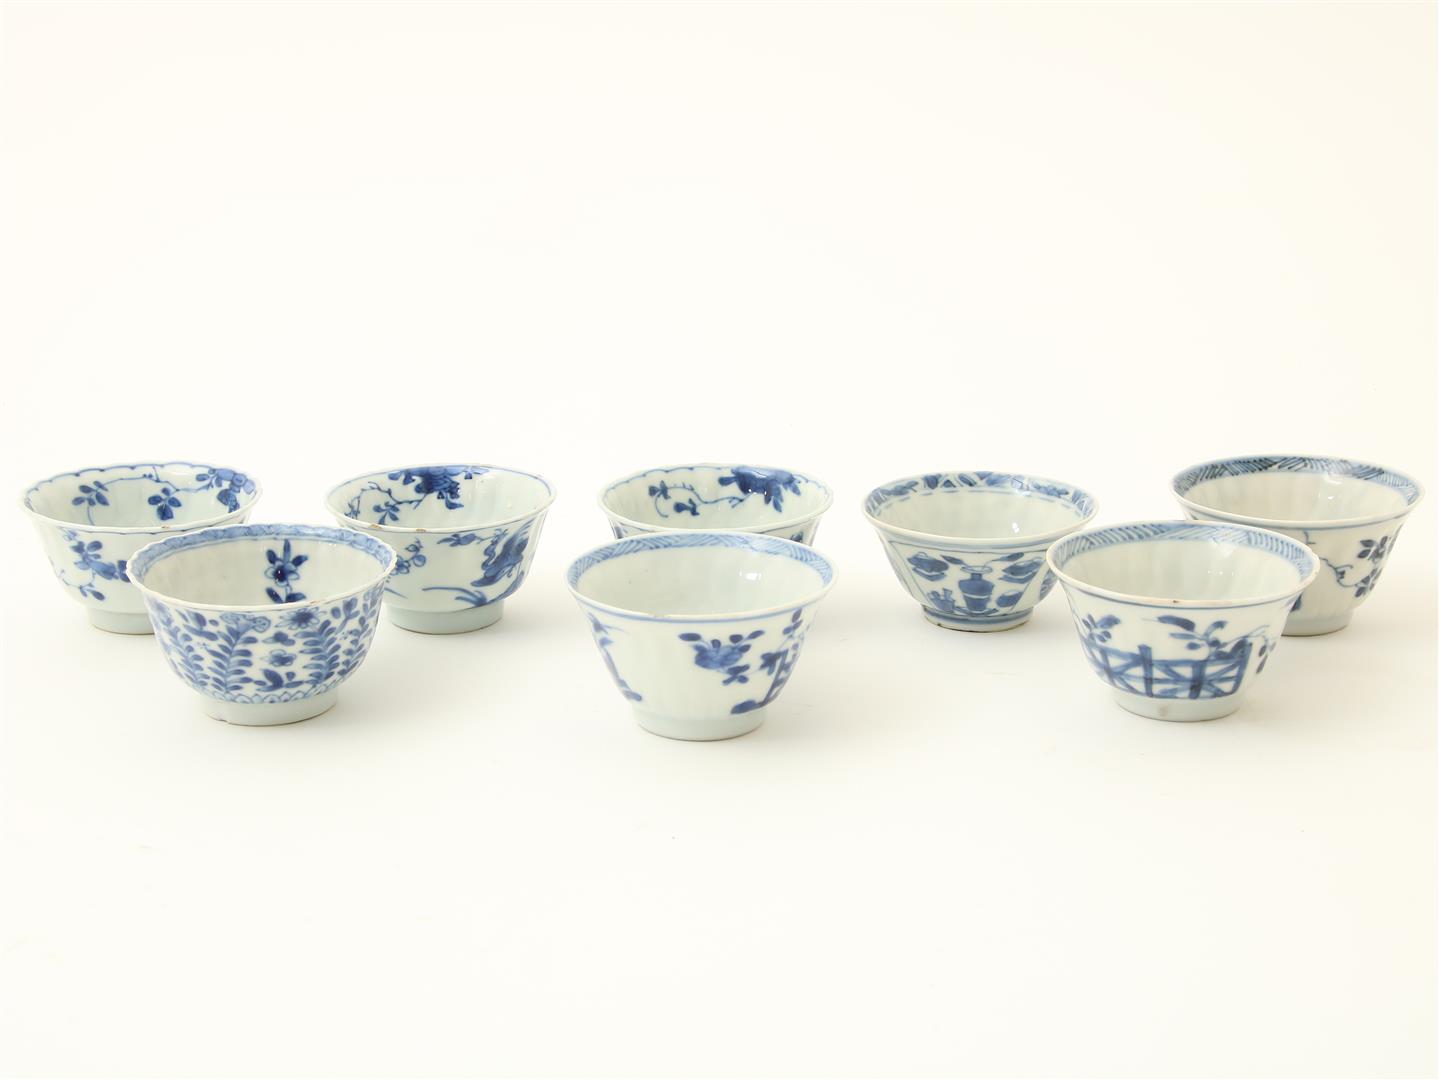 Series of 3 porcelain Kangxi cups with flower decoration and marked with Lozenge mark, including 5